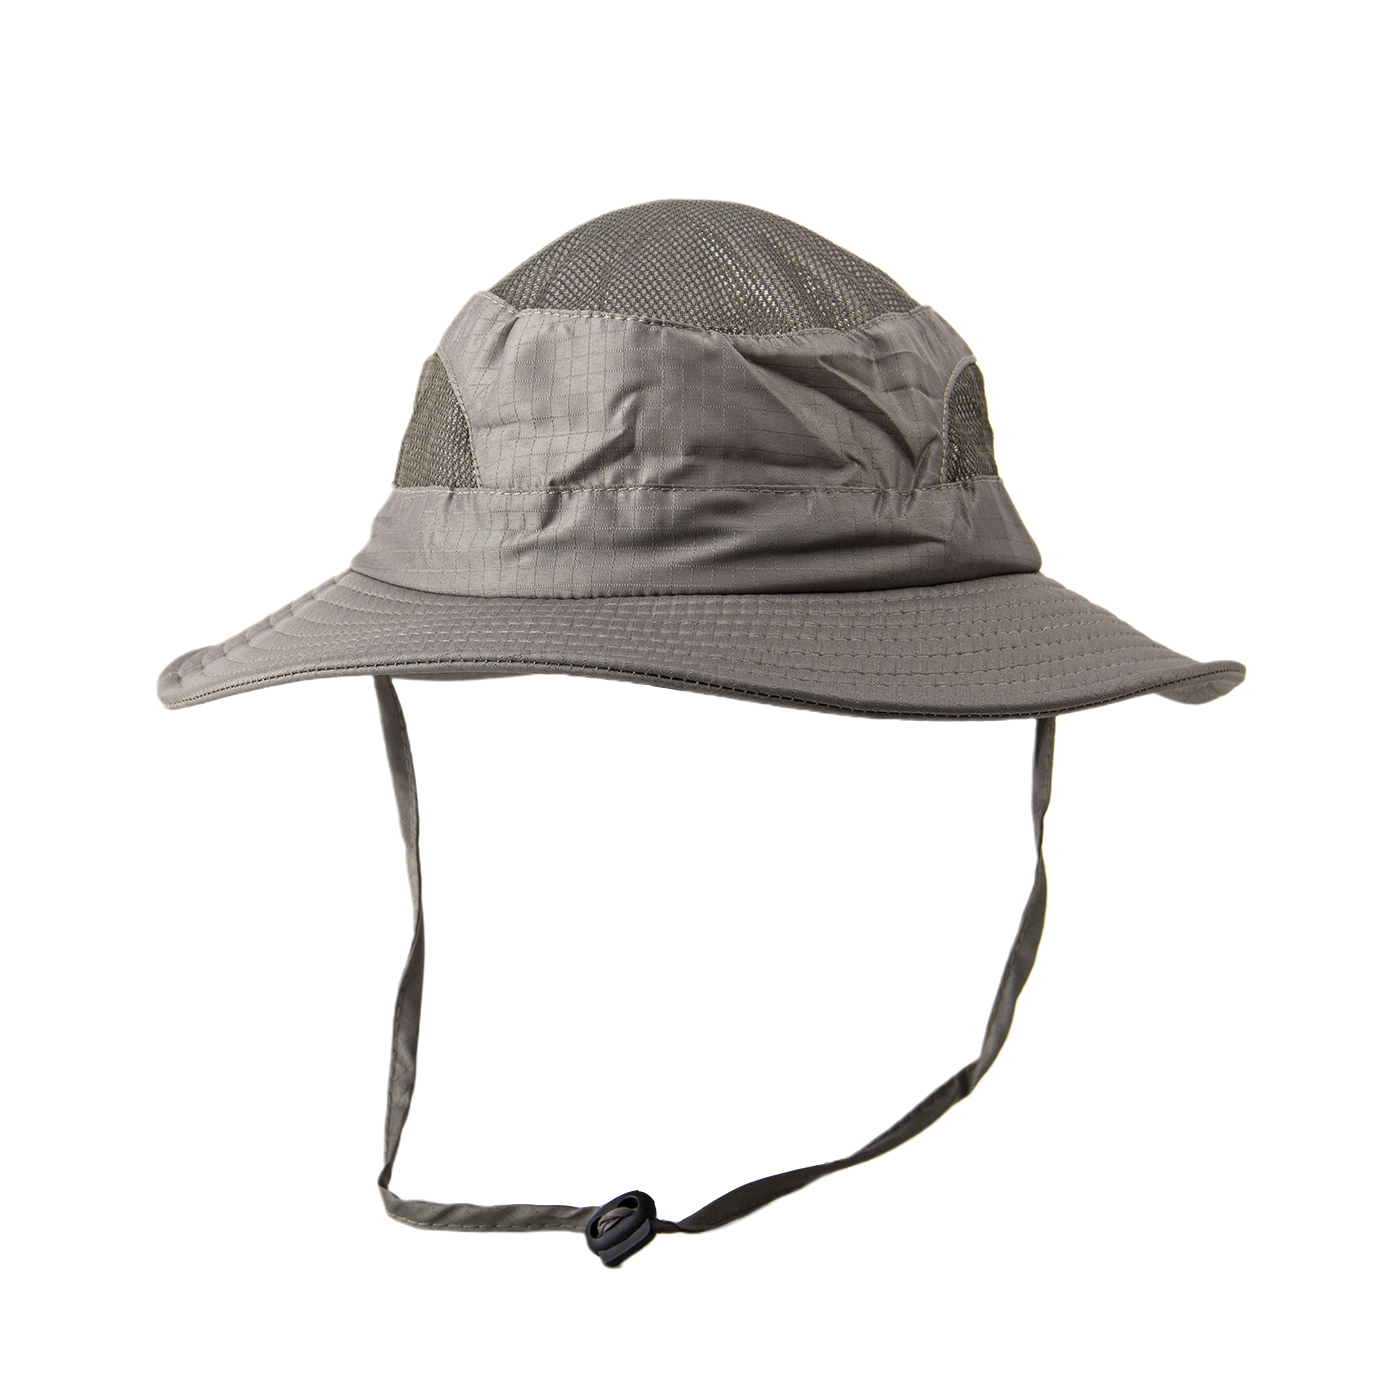 Men's Mesh Fishing Boonie Hat With String1